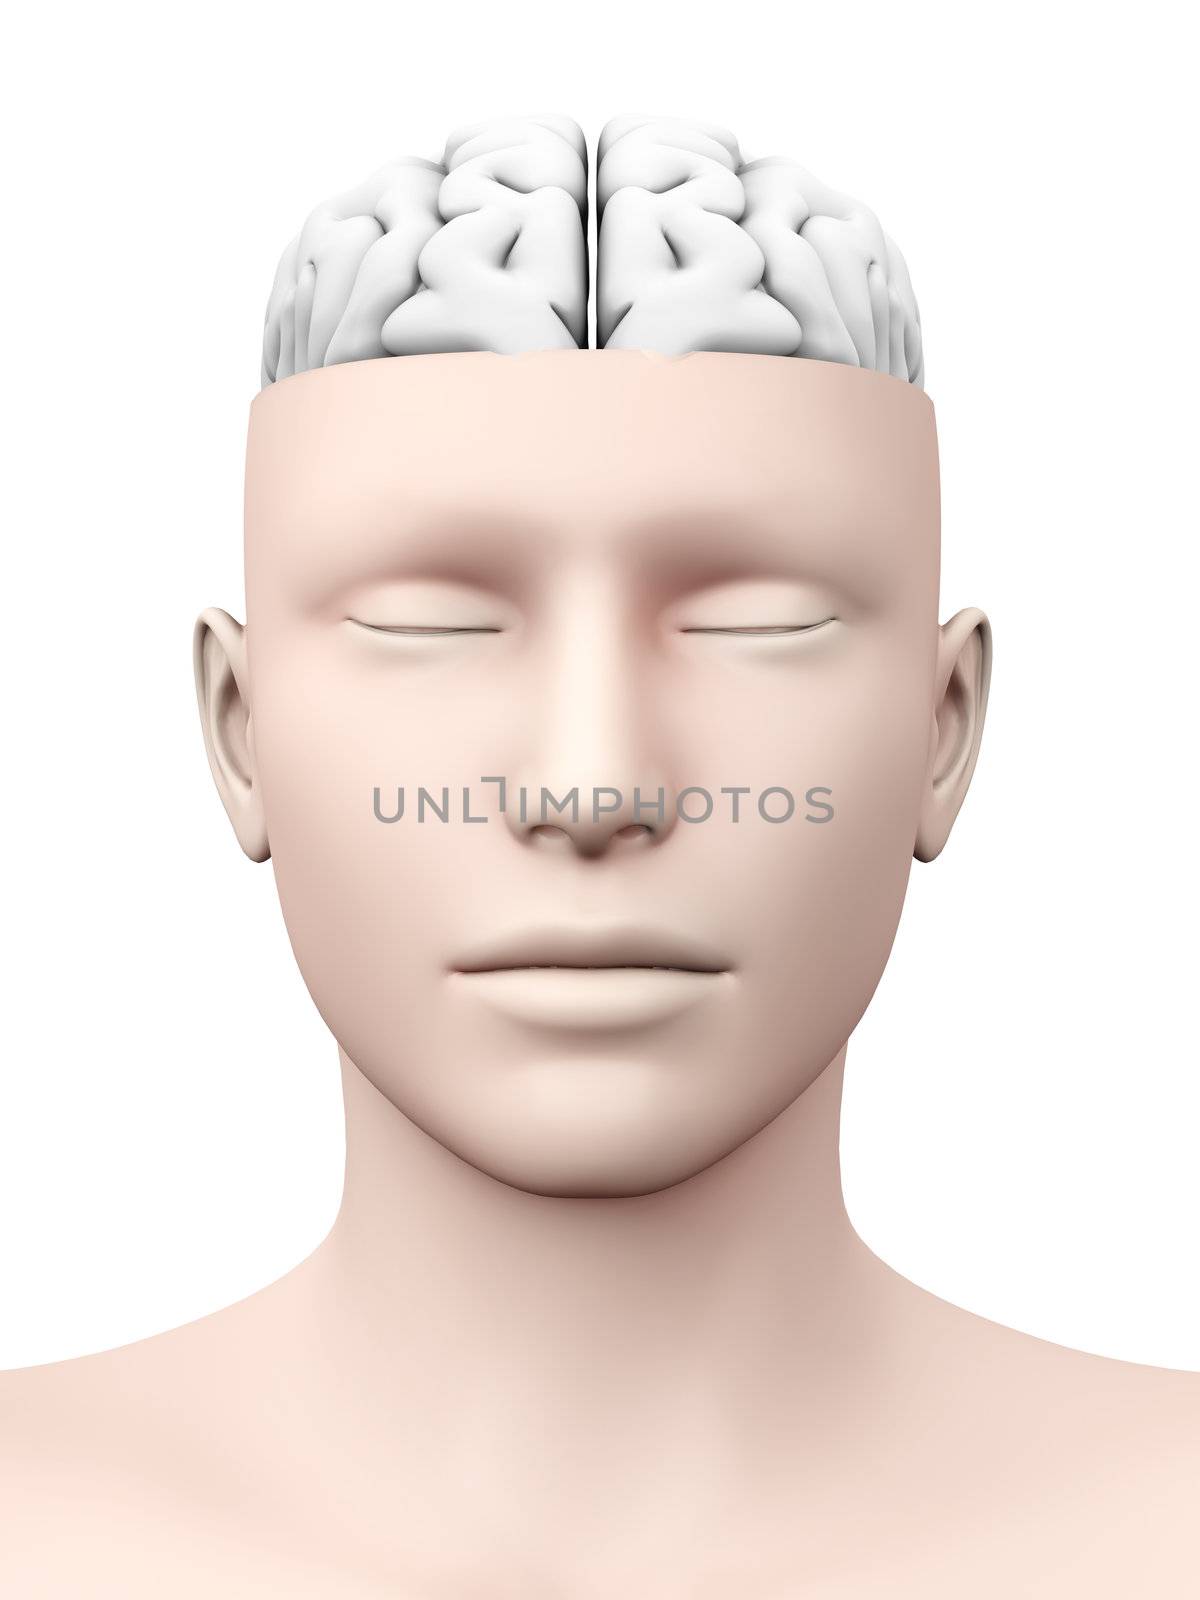 A human Brain. Anatomical visualization. 3D rendered illustration. Isolated on white.